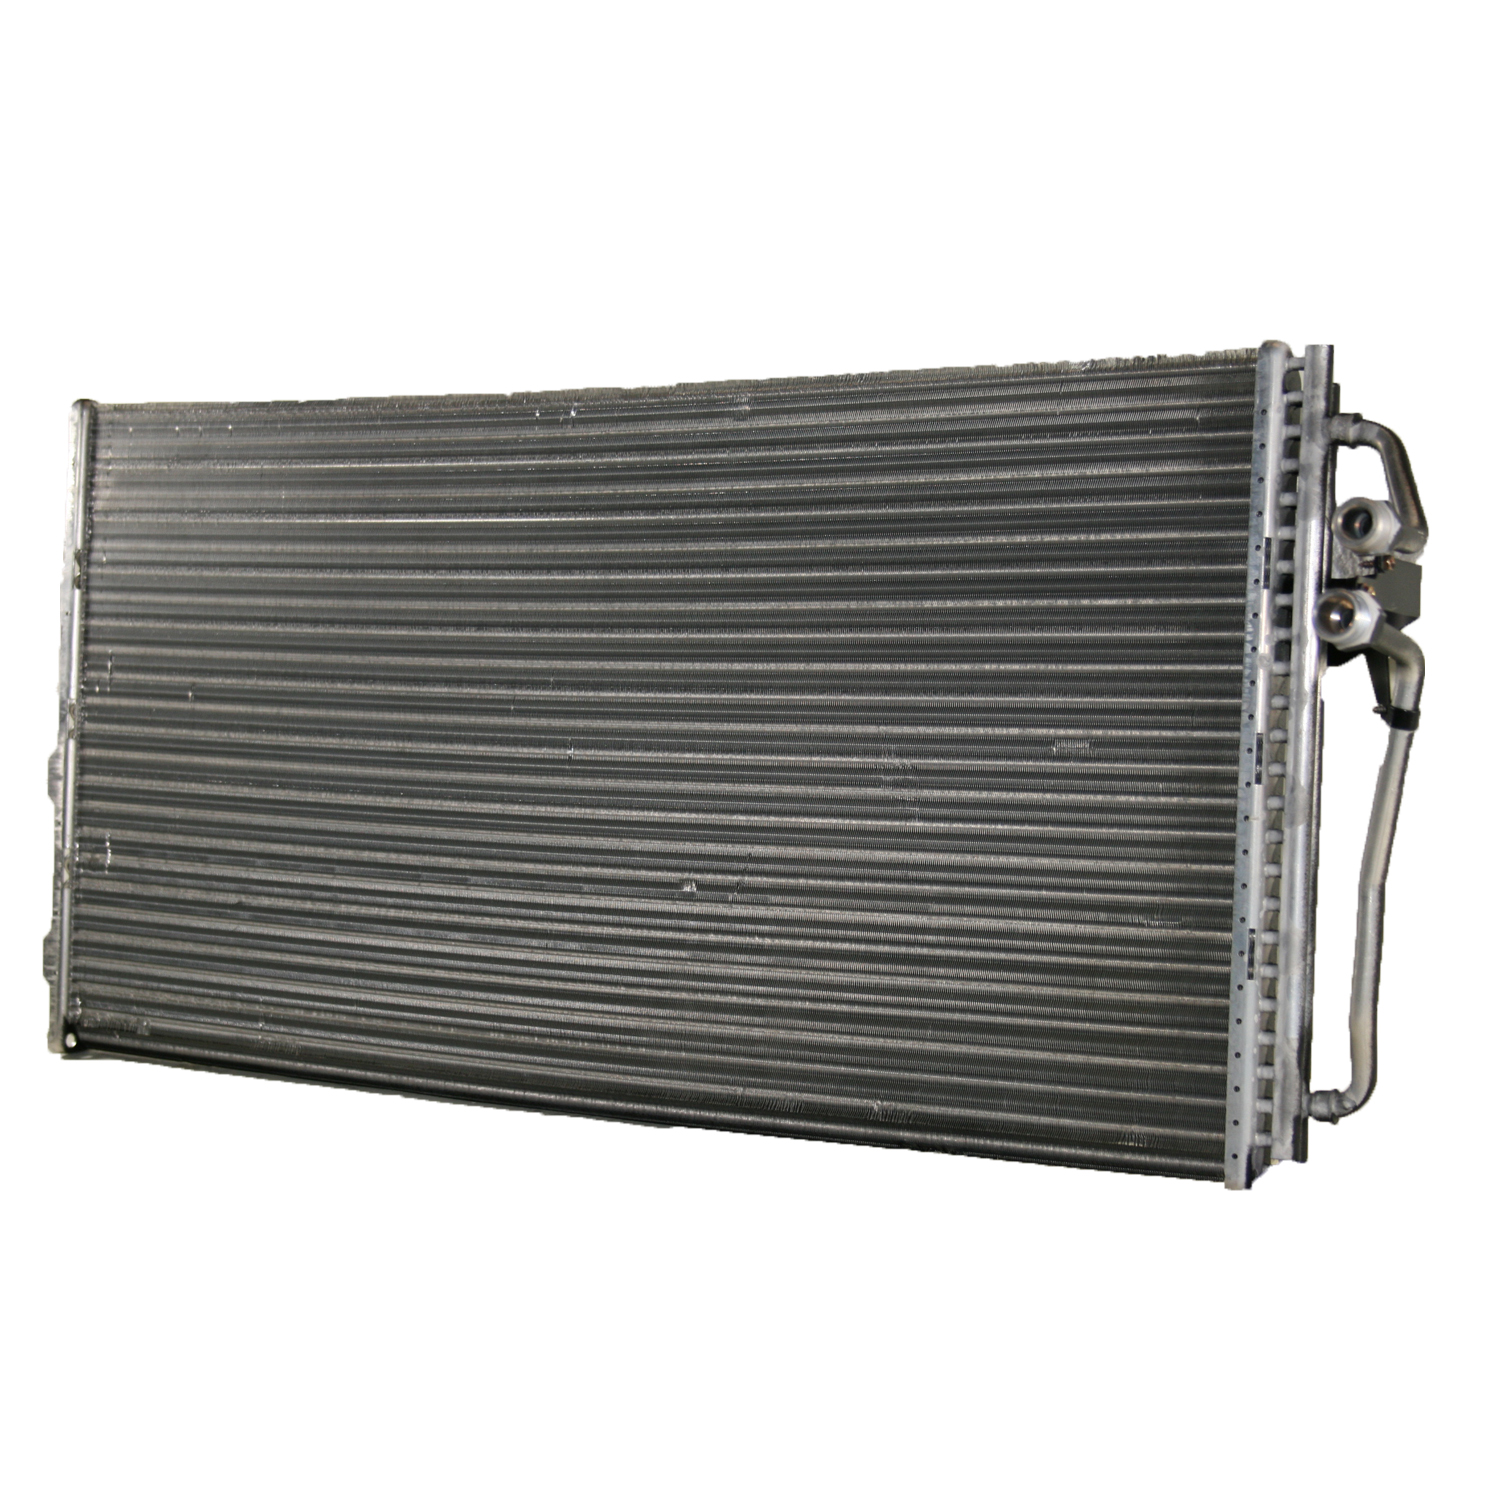 TCW Condenser 44-4549 New Product Image field_60b6a13a6e67c